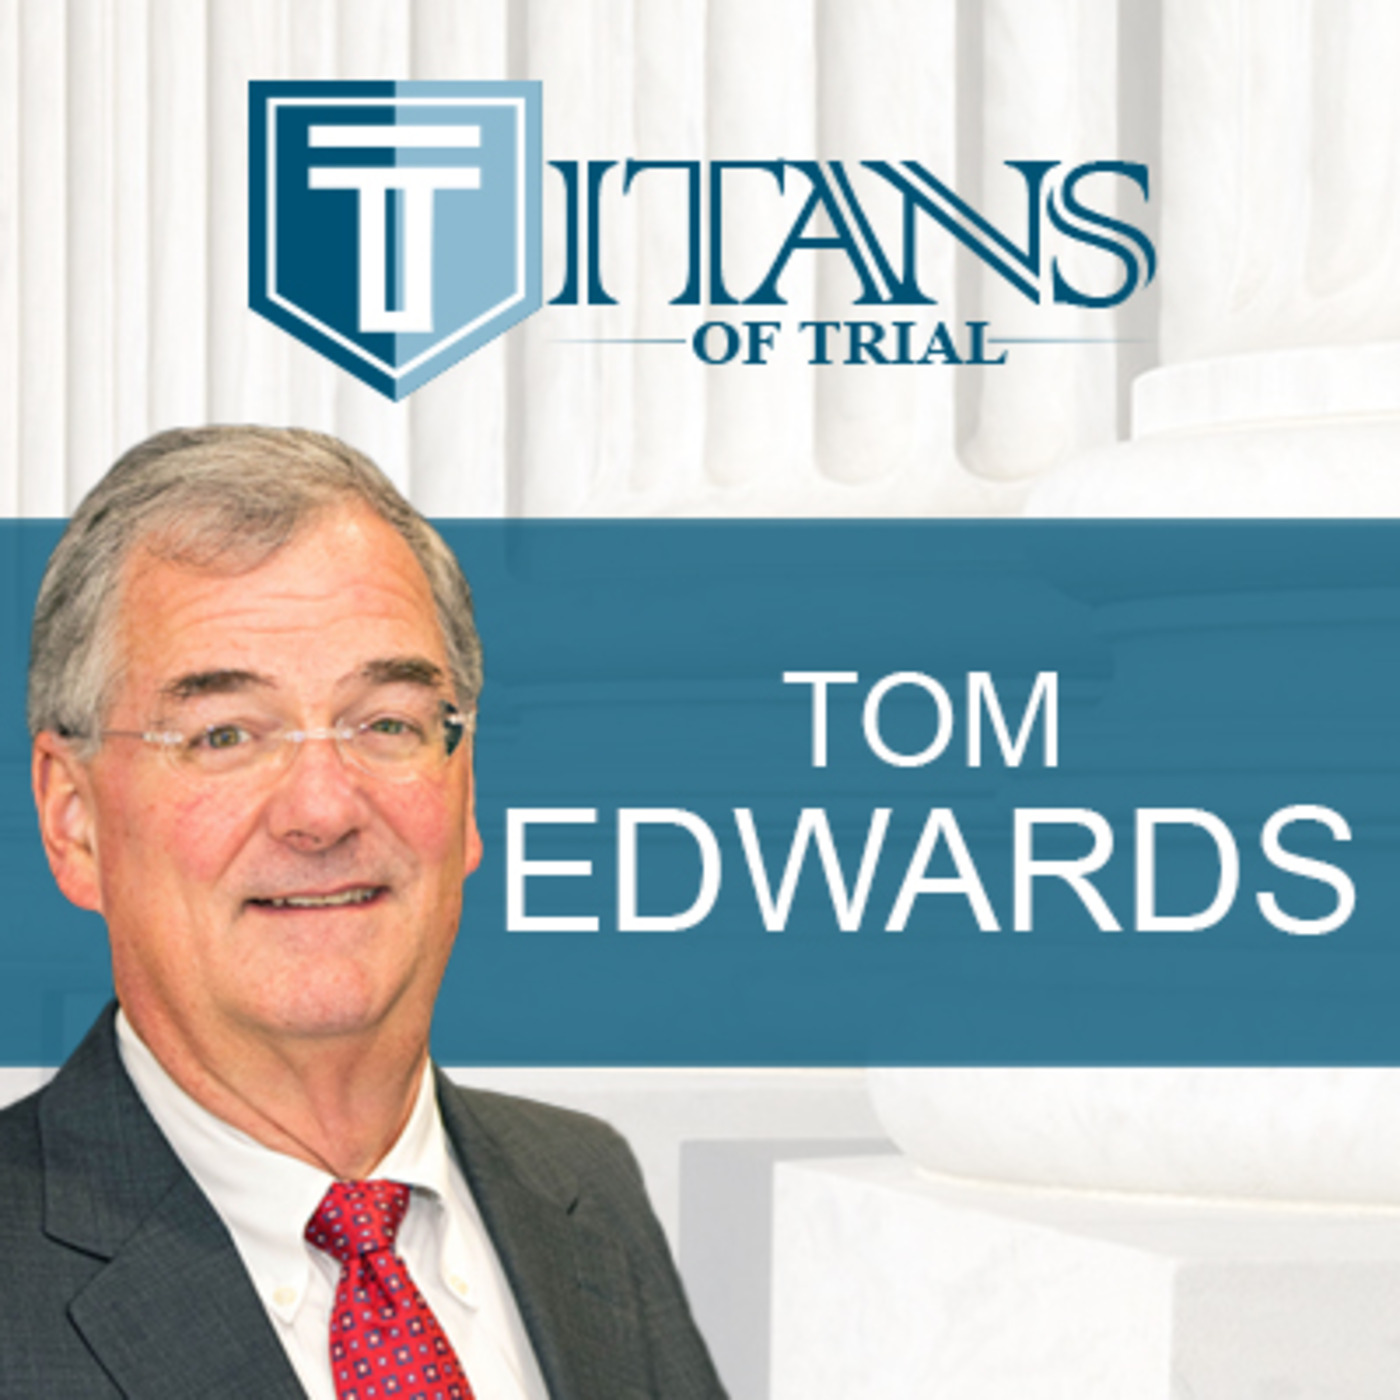 Titans of Trial - Tom Edwards